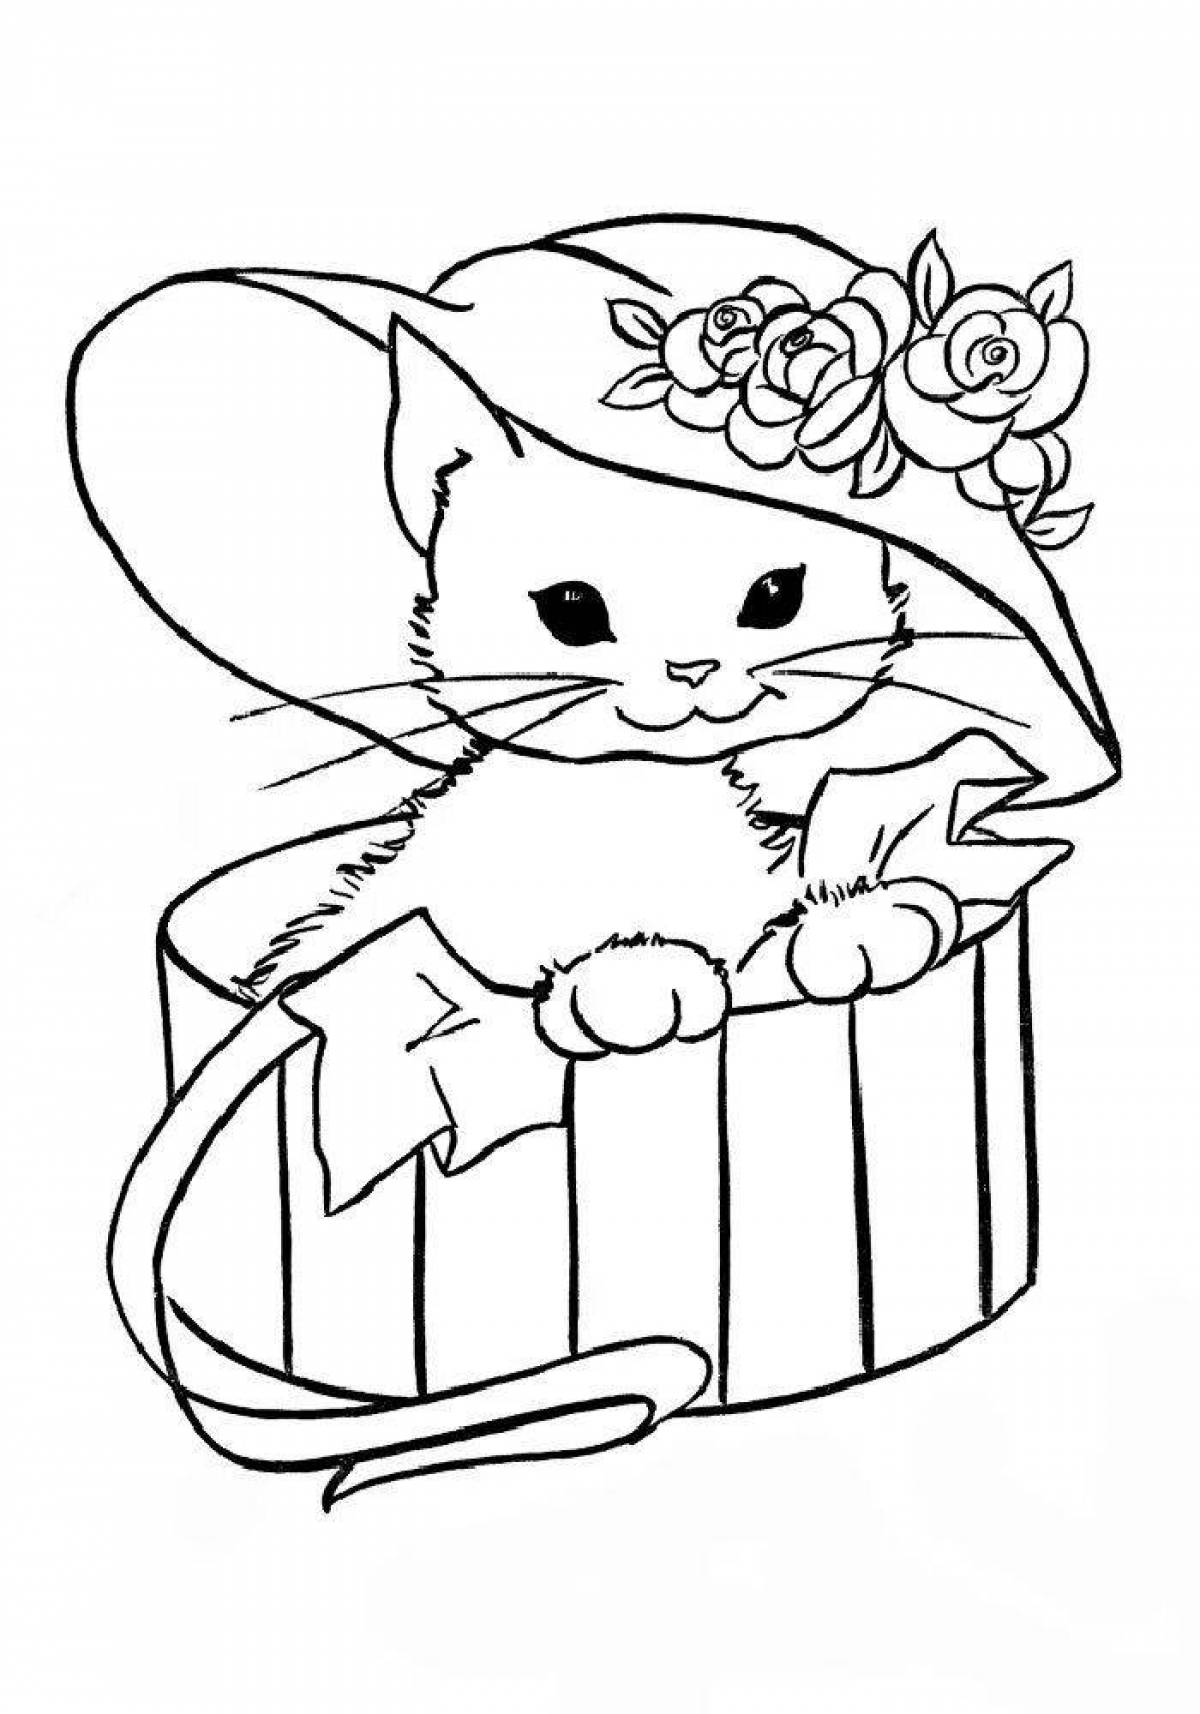 Colorful coloring book for girls with 9 year old animals